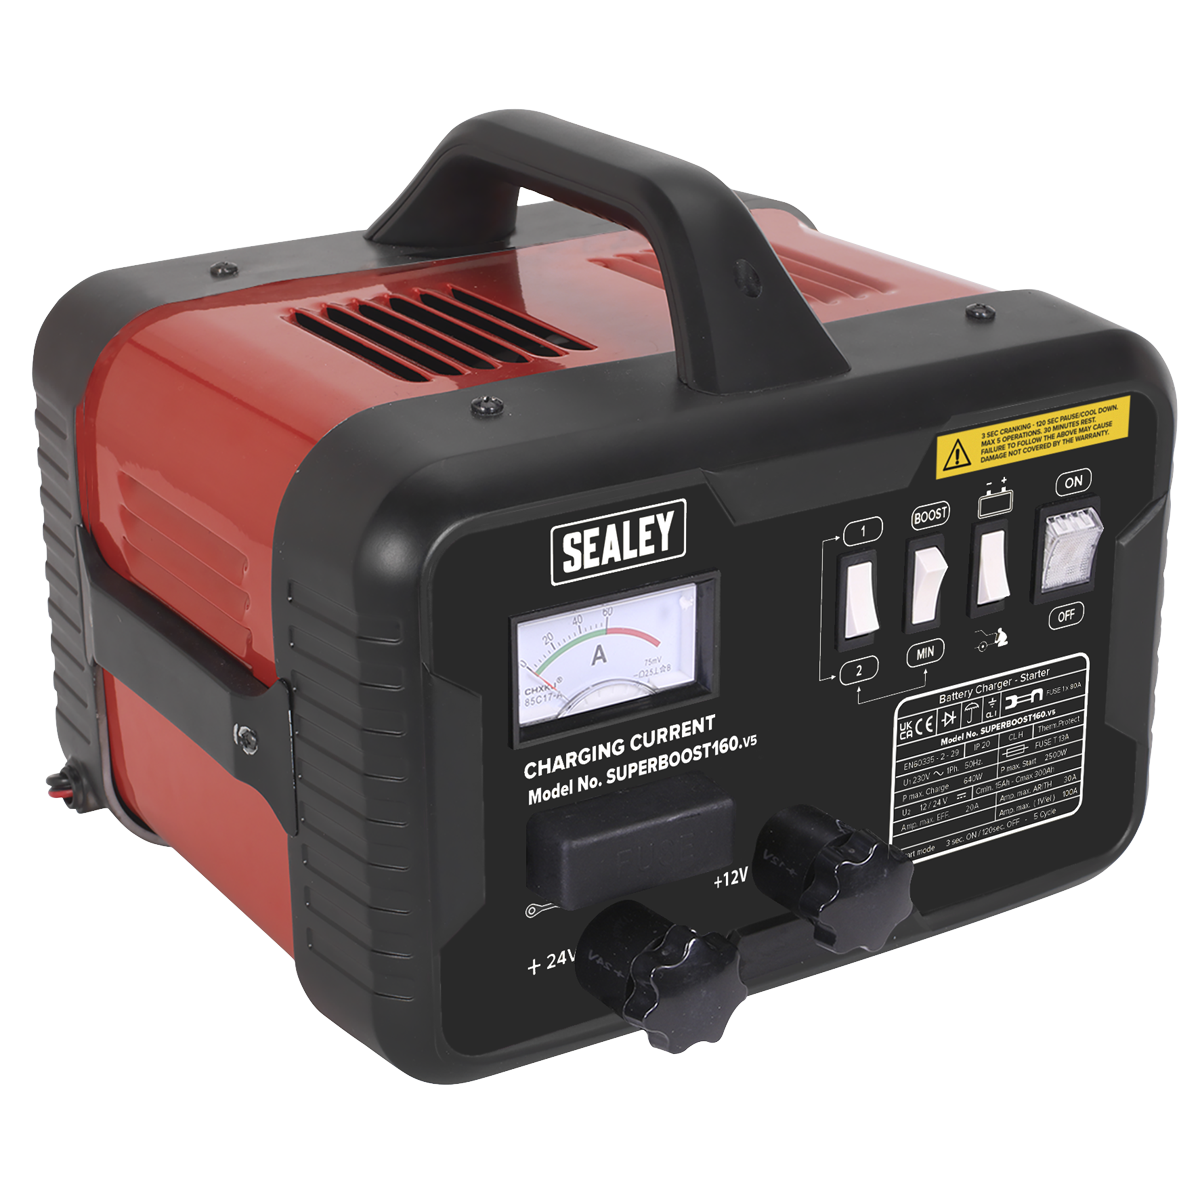 Sealey vehicle battery charger